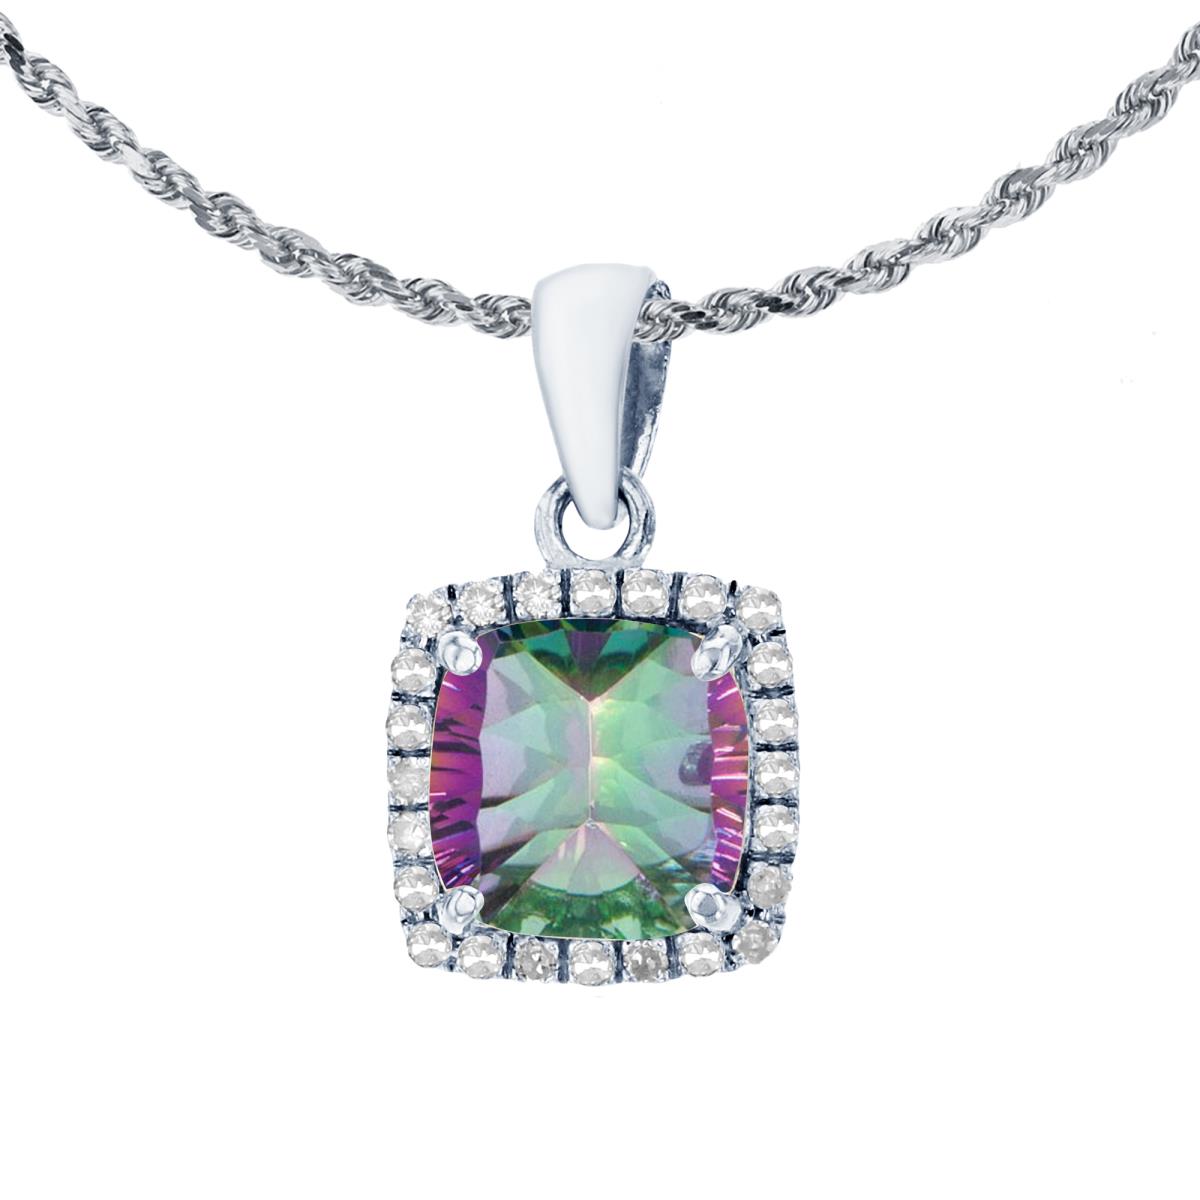 10K White Gold 7mm Cushion Mystic Green Topaz & 0.12 CTTW Diamond Halo 18" Rope Chain Necklace